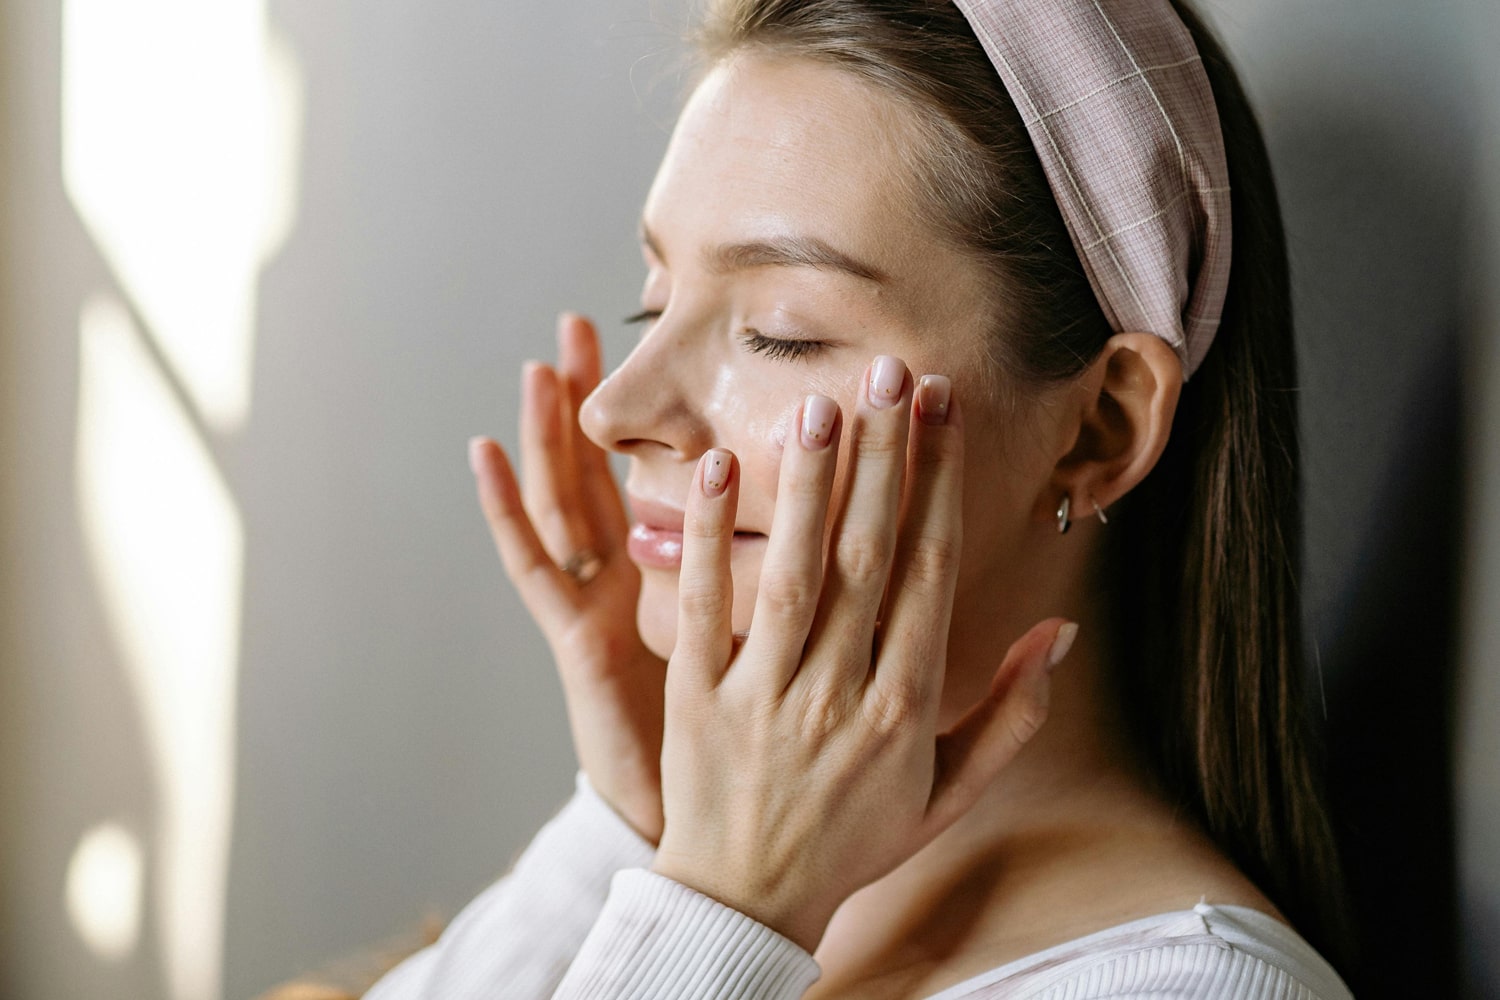 Learn About the Purpose of Eye Creams